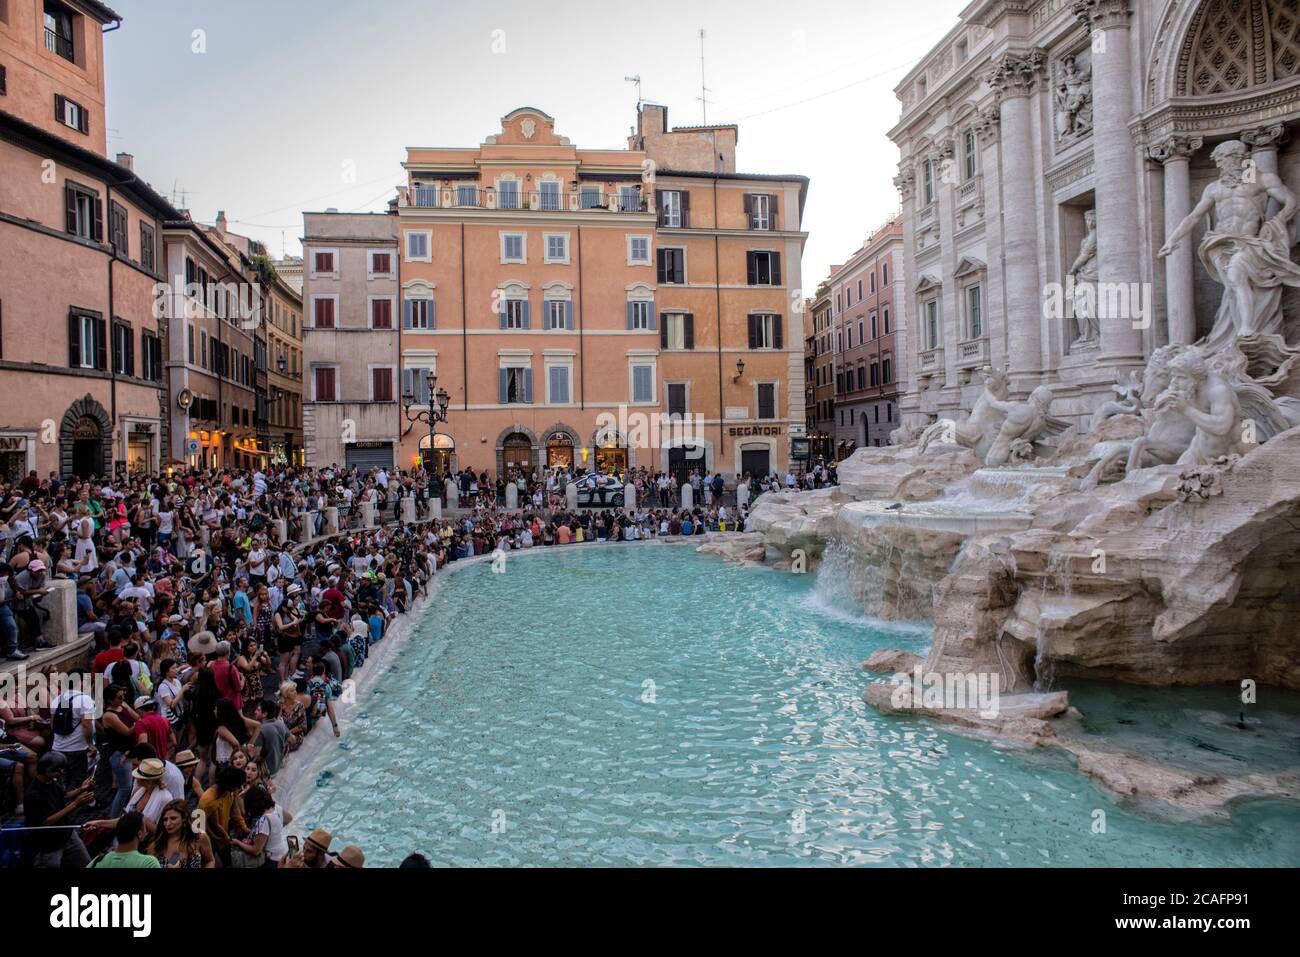 Europe - Italy, capital city Rome: Tourist at the Trevi Fountain which is one of the most popular spots in Rome. Stock Photo